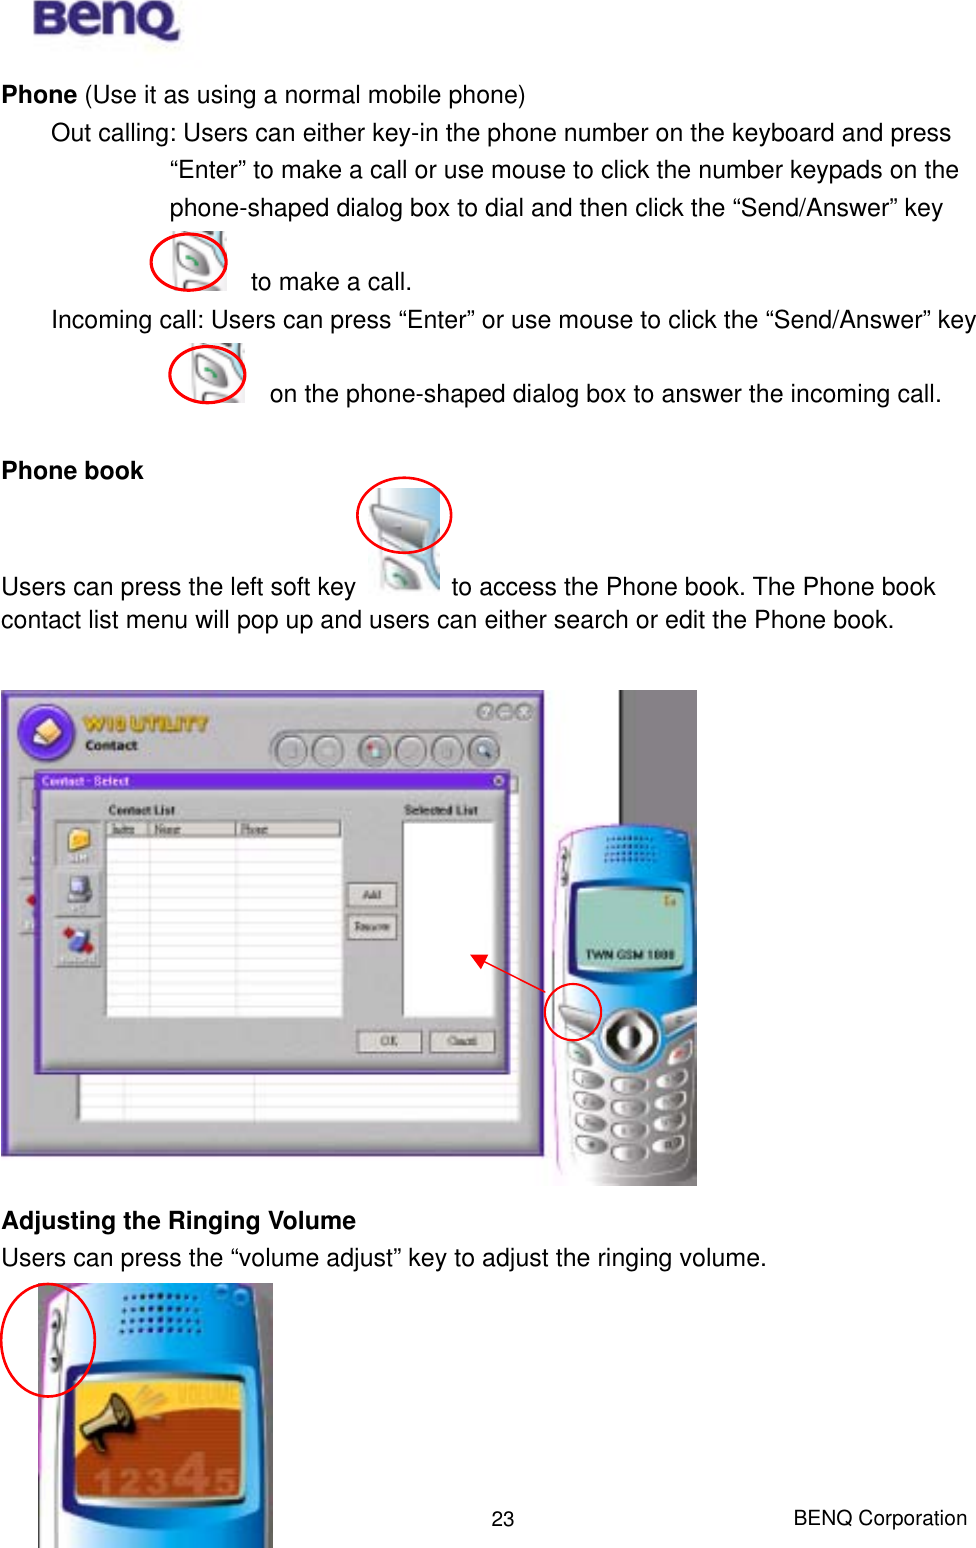  BENQ Corporation 23Phone (Use it as using a normal mobile phone) Out calling: Users can either key-in the phone number on the keyboard and press “Enter” to make a call or use mouse to click the number keypads on the phone-shaped dialog box to dial and then click the “Send/Answer” key       to make a call. Incoming call: Users can press “Enter” or use mouse to click the “Send/Answer” key     on the phone-shaped dialog box to answer the incoming call.    Phone book  Users can press the left soft key    to access the Phone book. The Phone book contact list menu will pop up and users can either search or edit the Phone book.   Adjusting the Ringing Volume  Users can press the “volume adjust” key to adjust the ringing volume.       